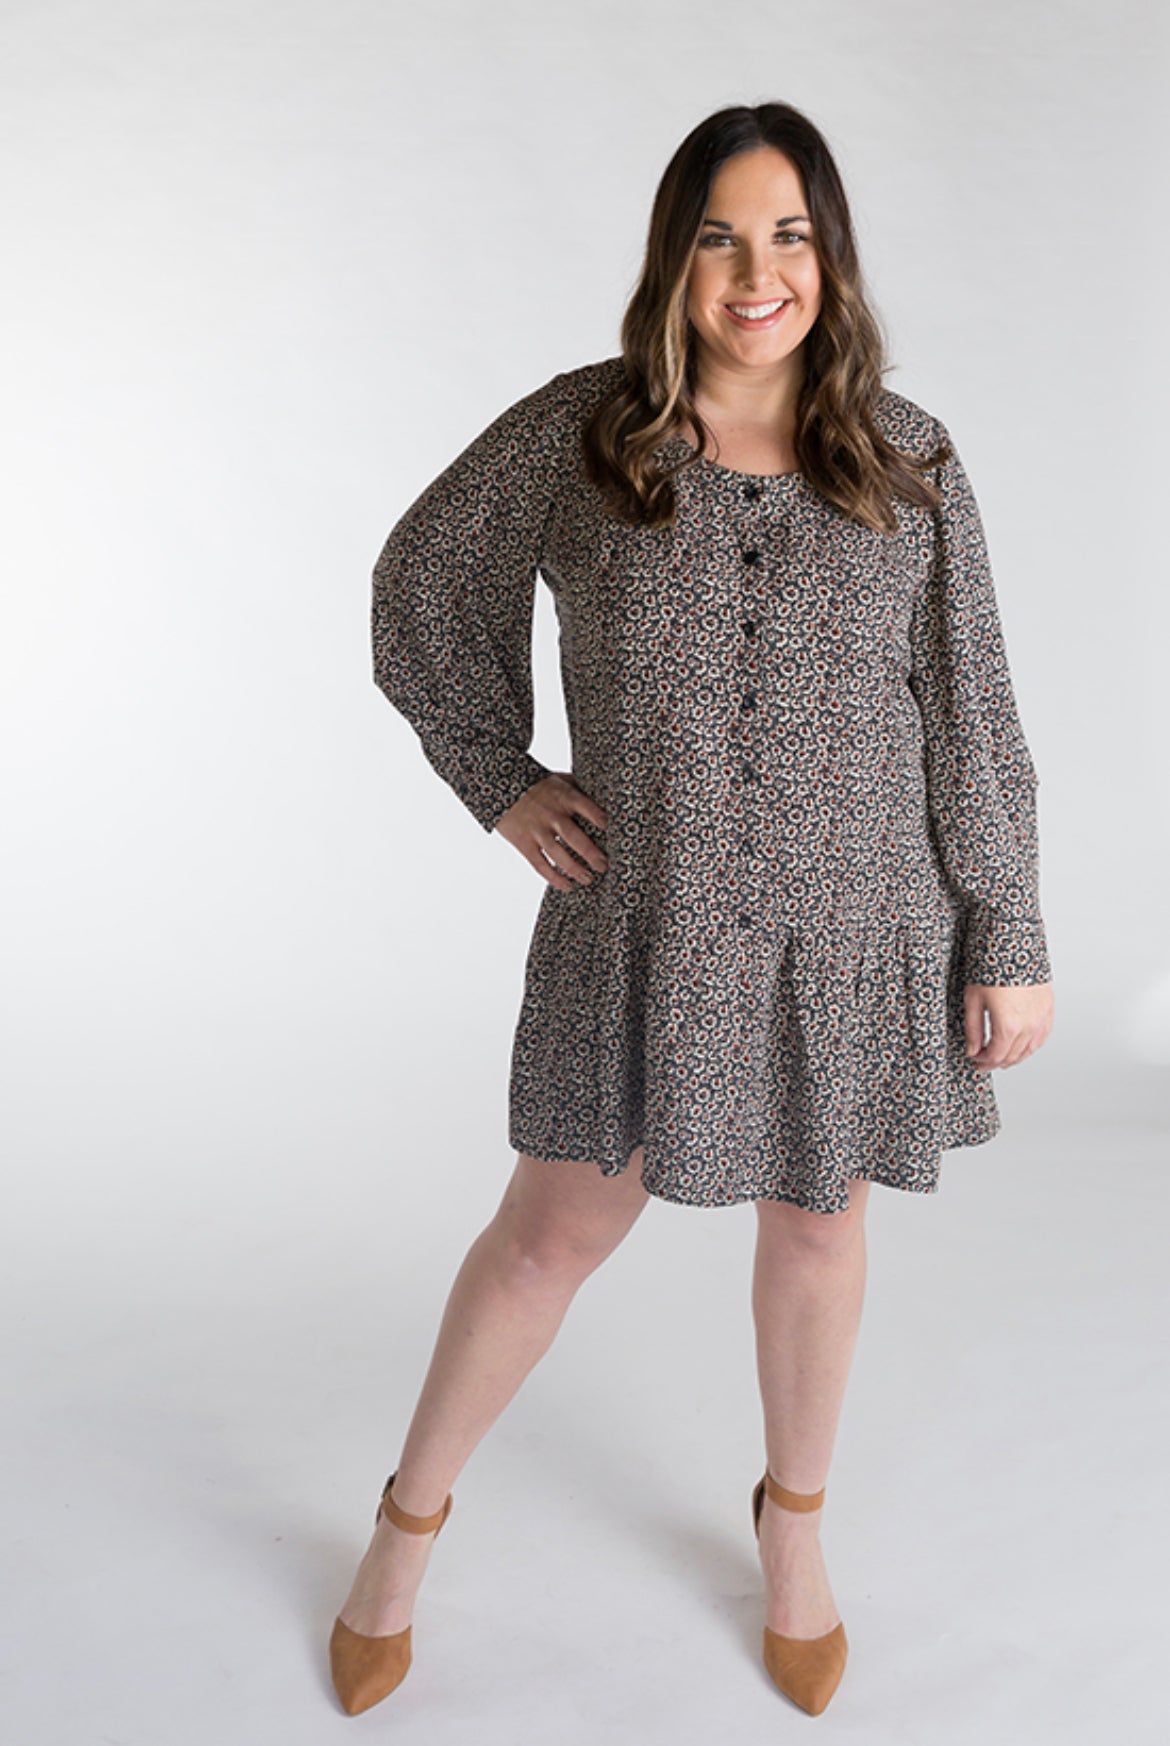 Chalk and Notch - Wren Dress and Top Sewing Pattern